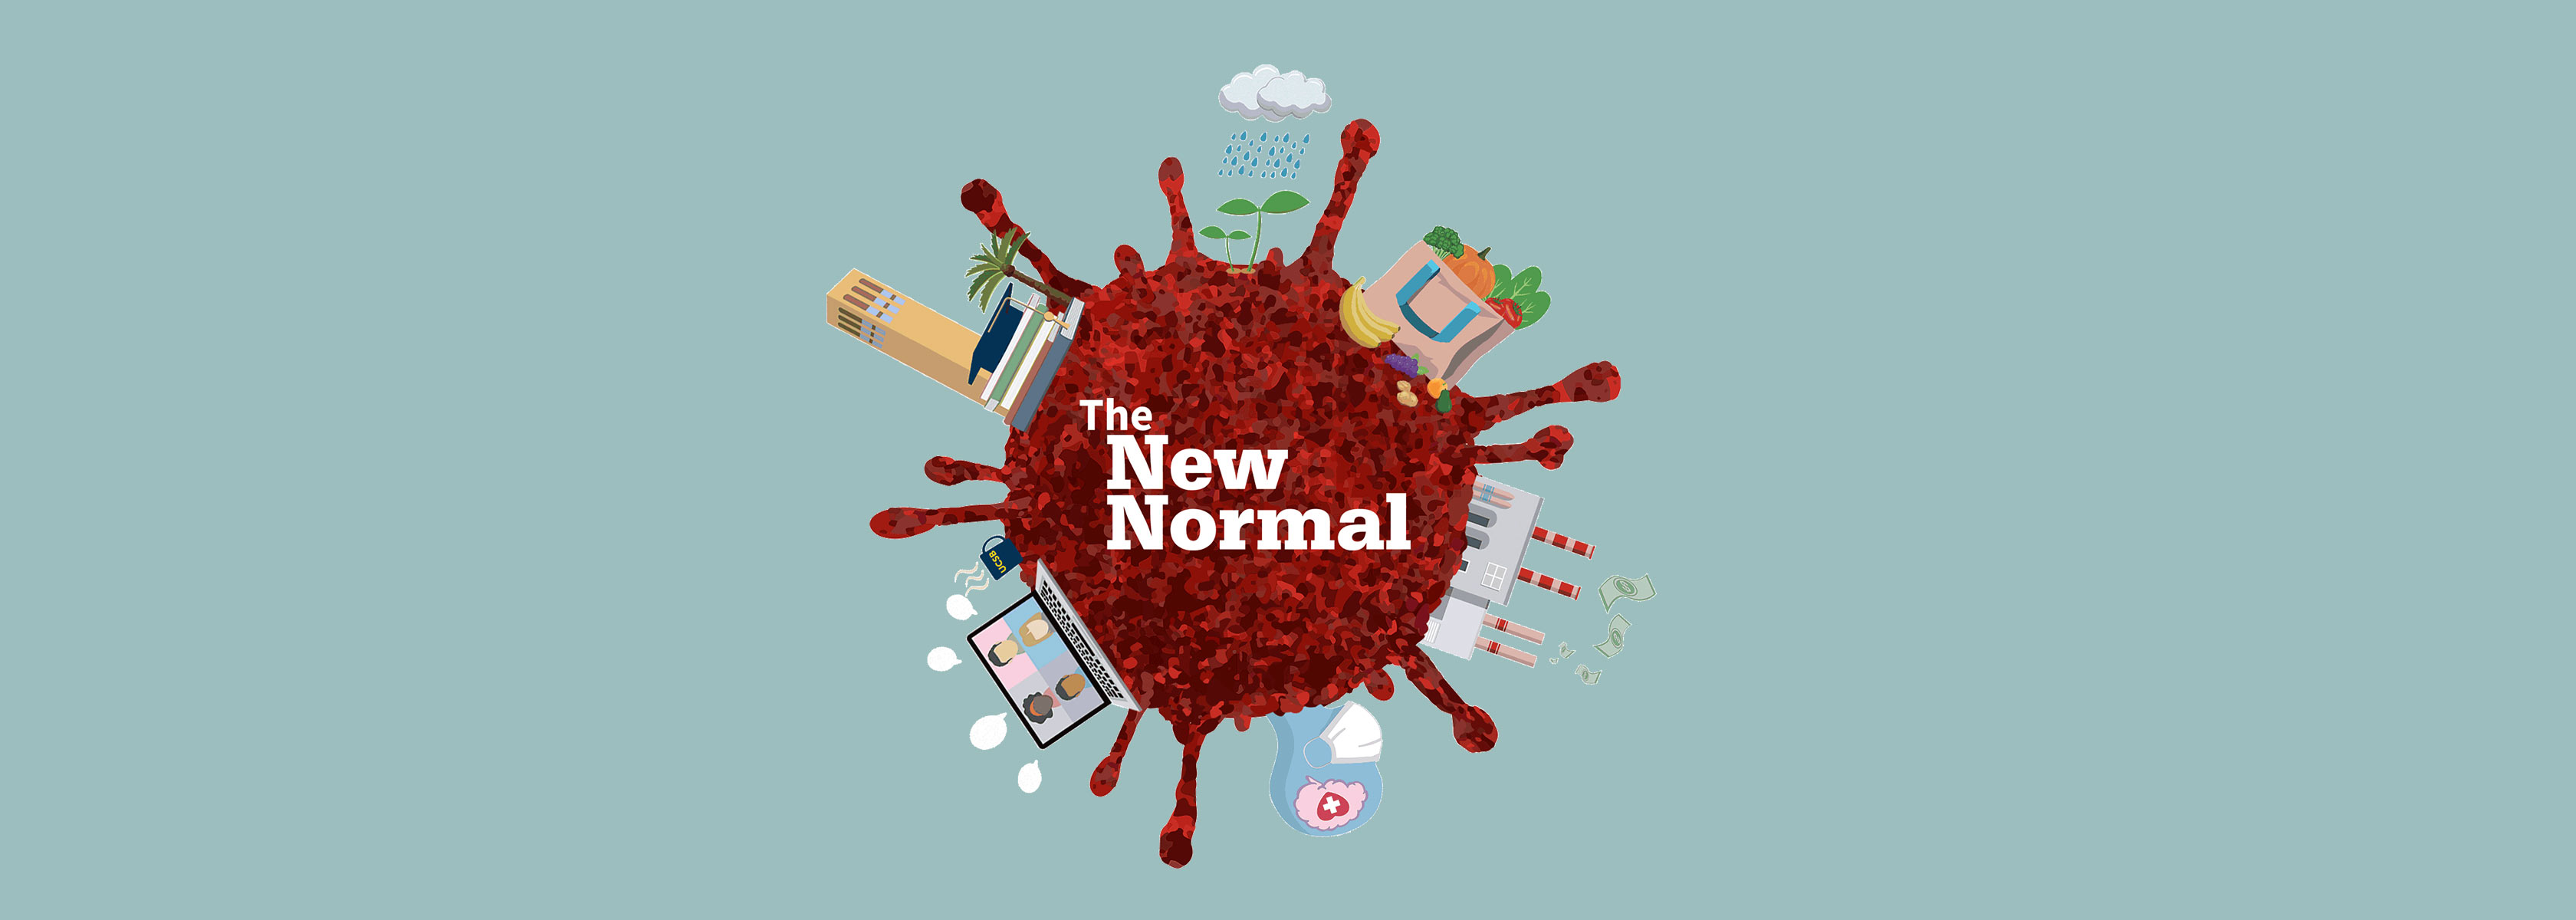 new normal magazine cover